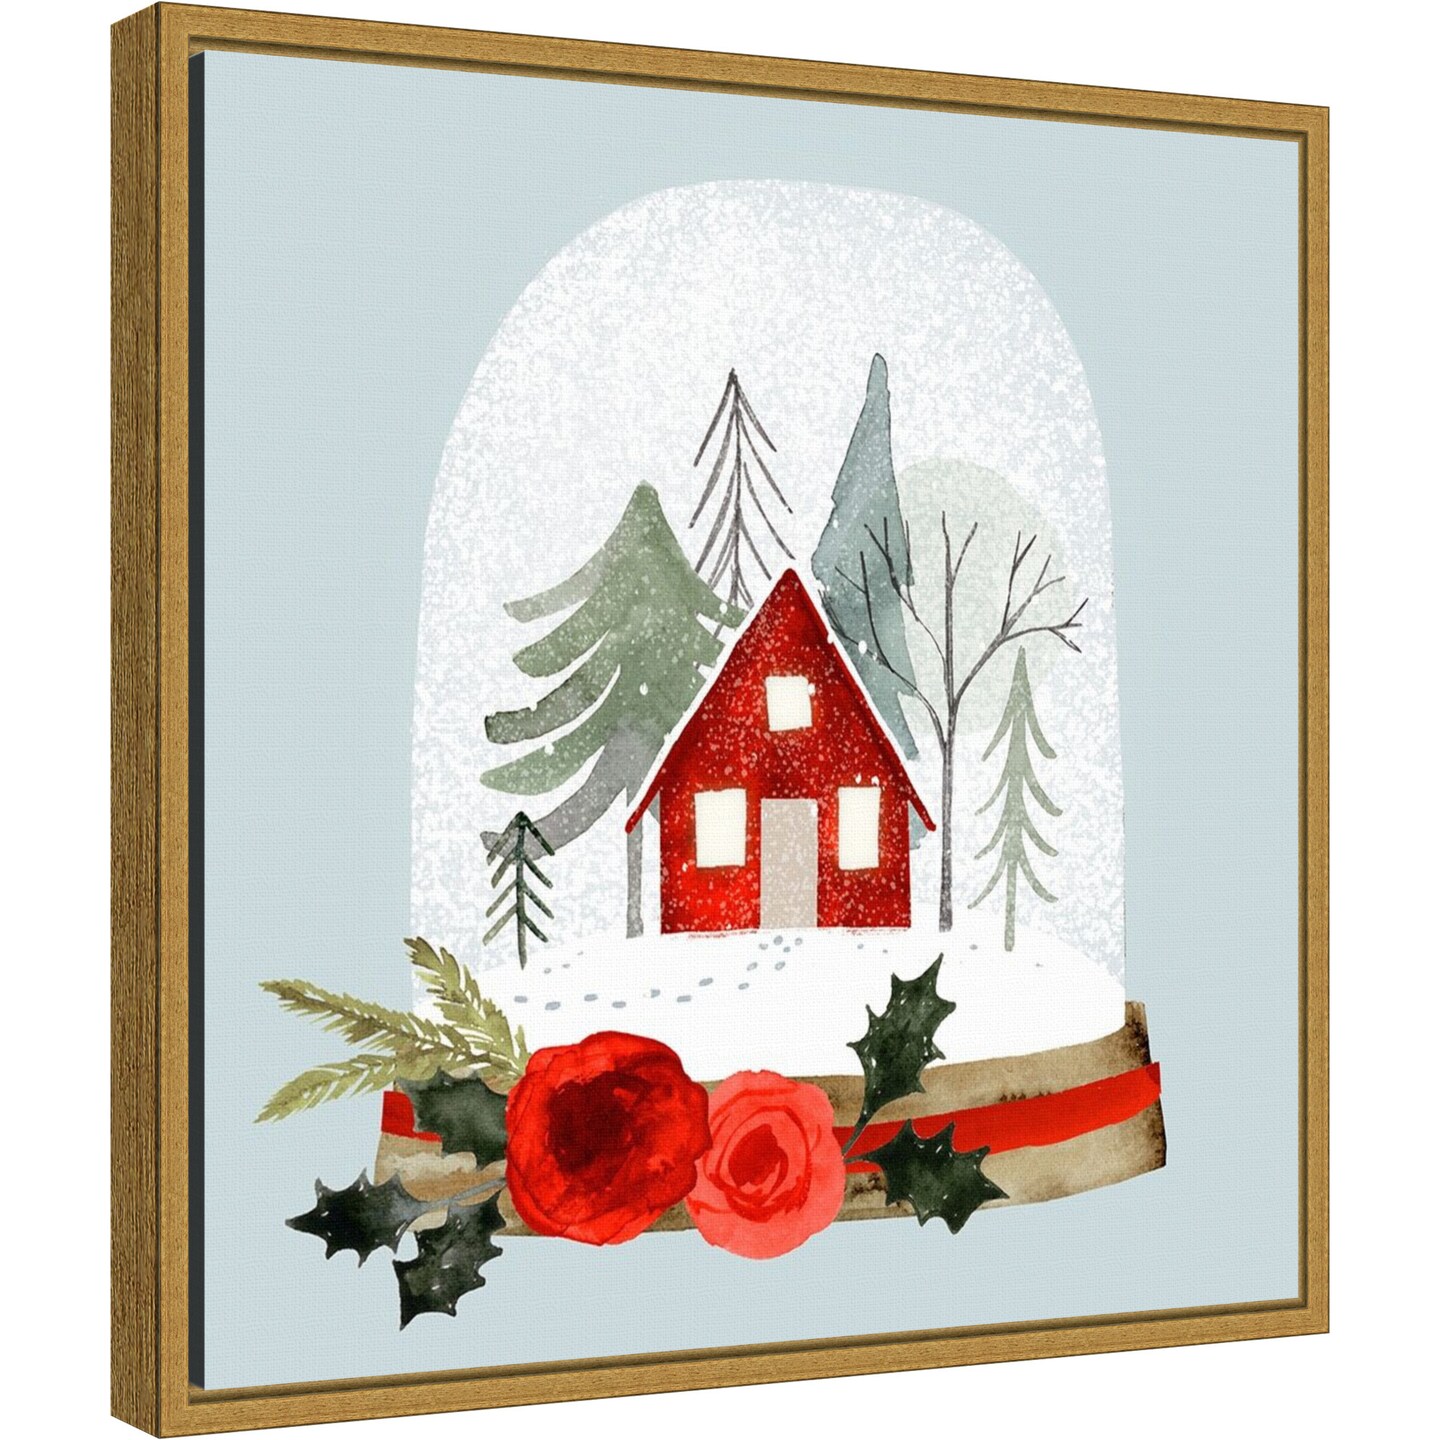 Snow Globe Village I by Victoria Barnes 16-in. W x 16-in. H. Canvas Wall Art Print Framed in Gold